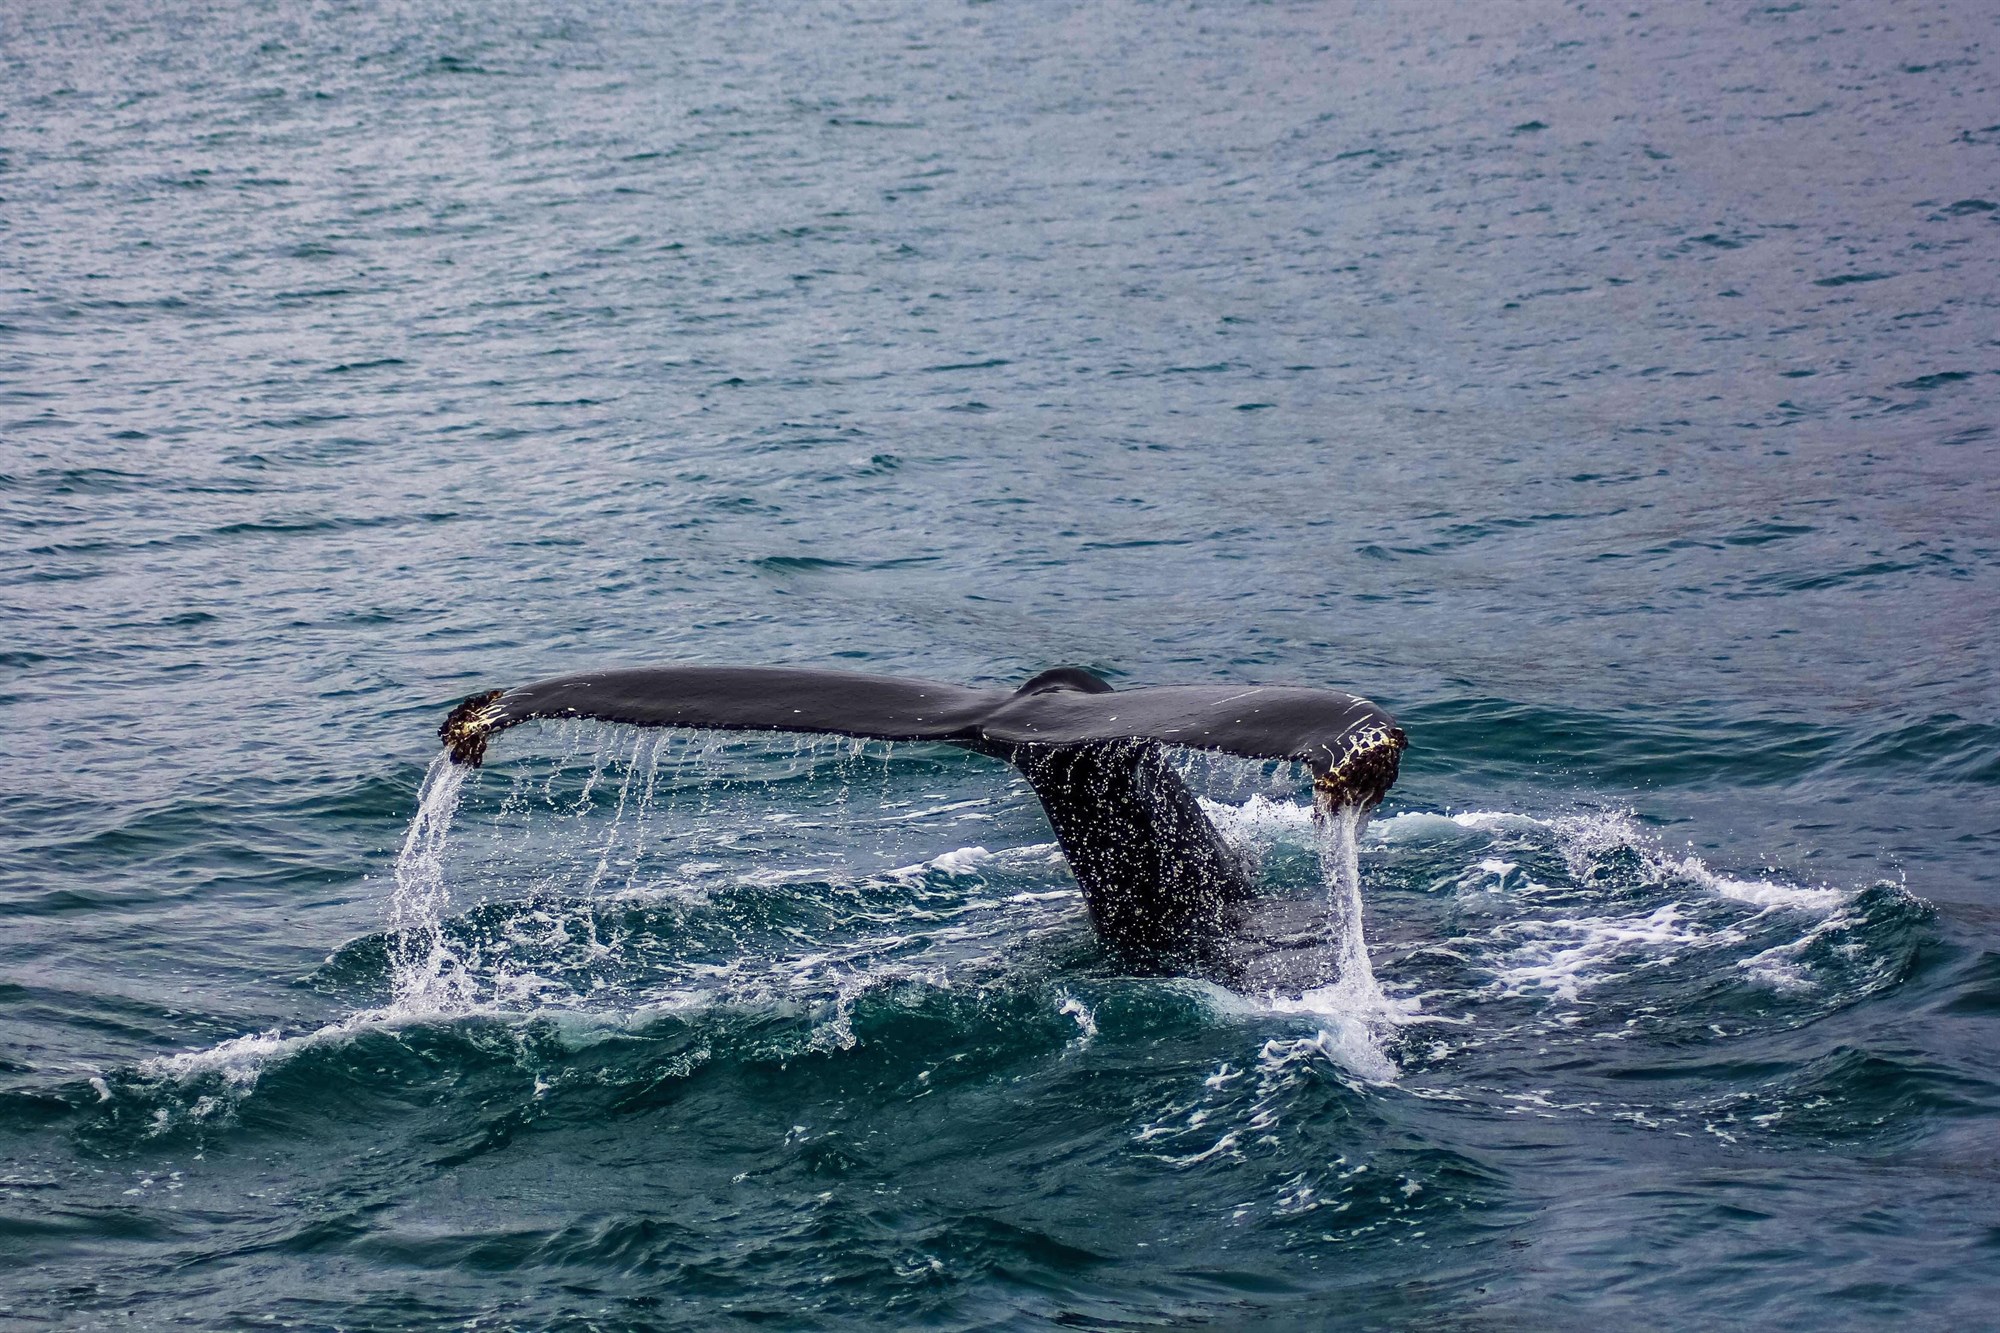 Whale's tail emerging above water in Iceland